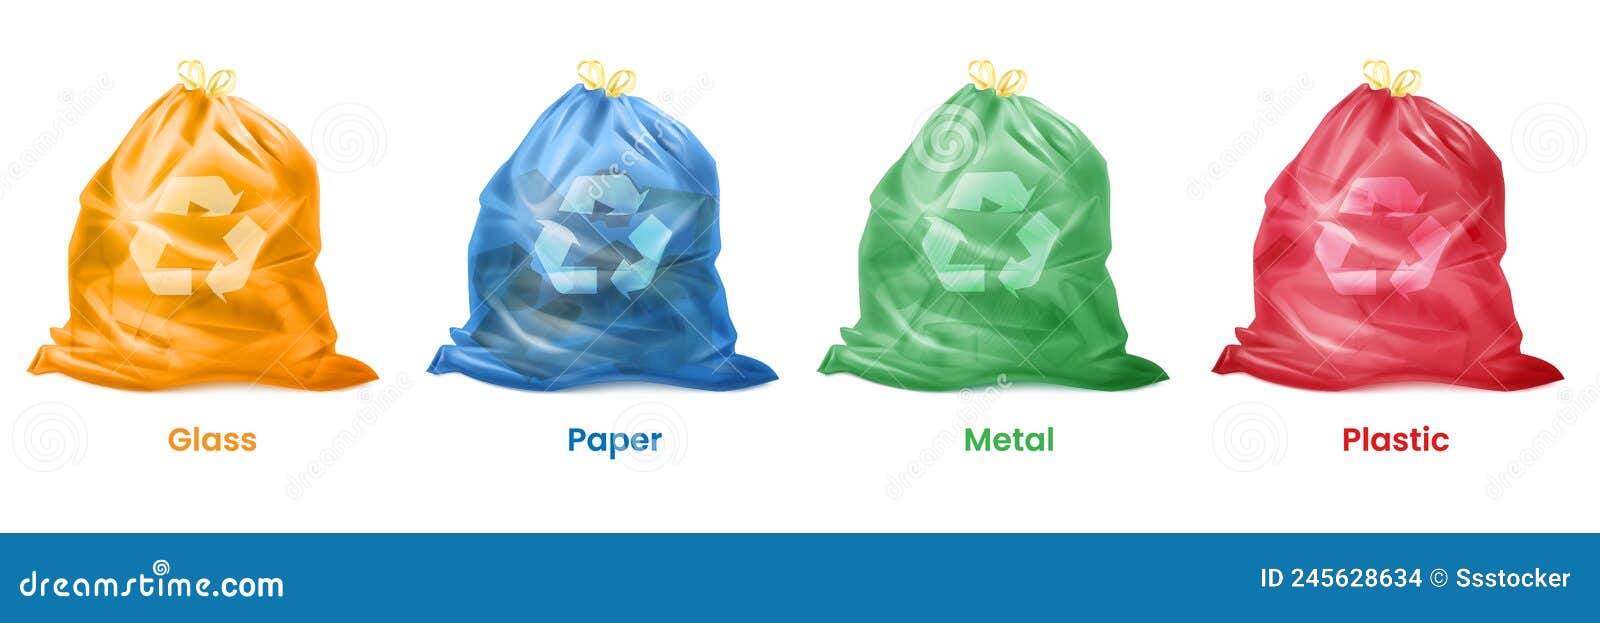 realistic separate trash. 3d plastic sacks waste bag for util kitchen garbage, utility separators eco collect recycle